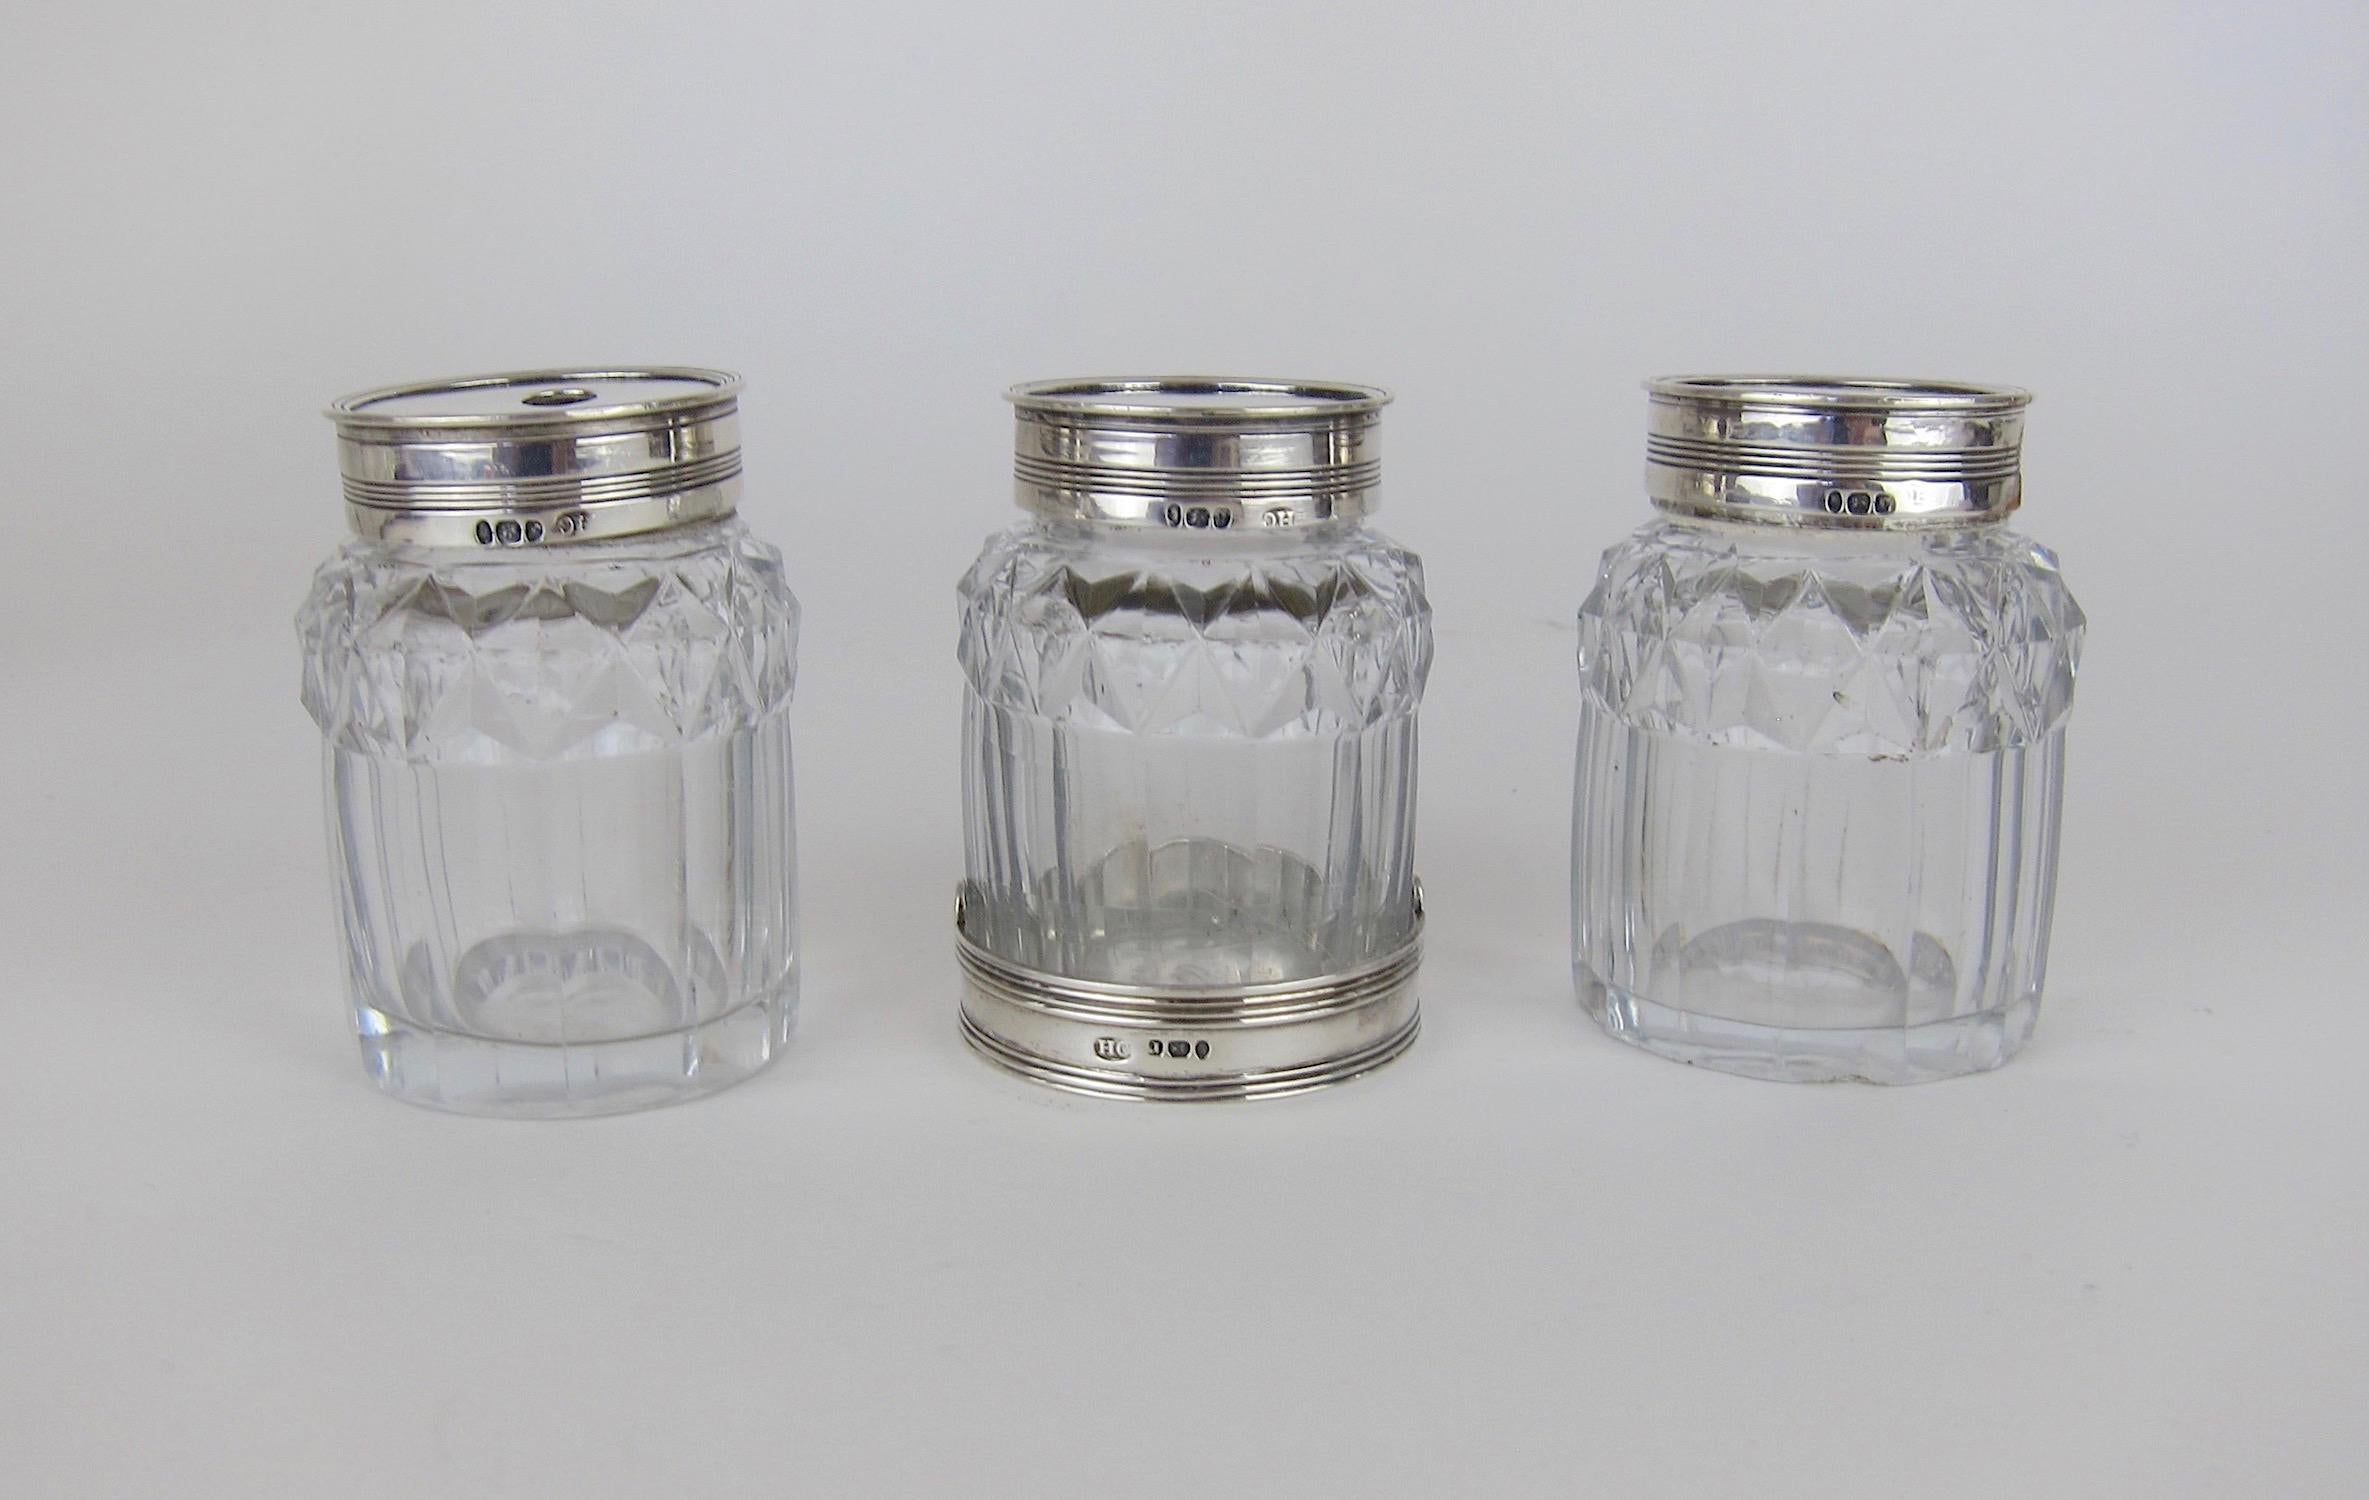 A set of three George III cut-glass bottles with sterling silver lids, made by English silversmith Henry Chawner of London and hallmarked for 1792. The antique set comes from The collection of Peggy and David Rockefeller. 

The 18th century jars